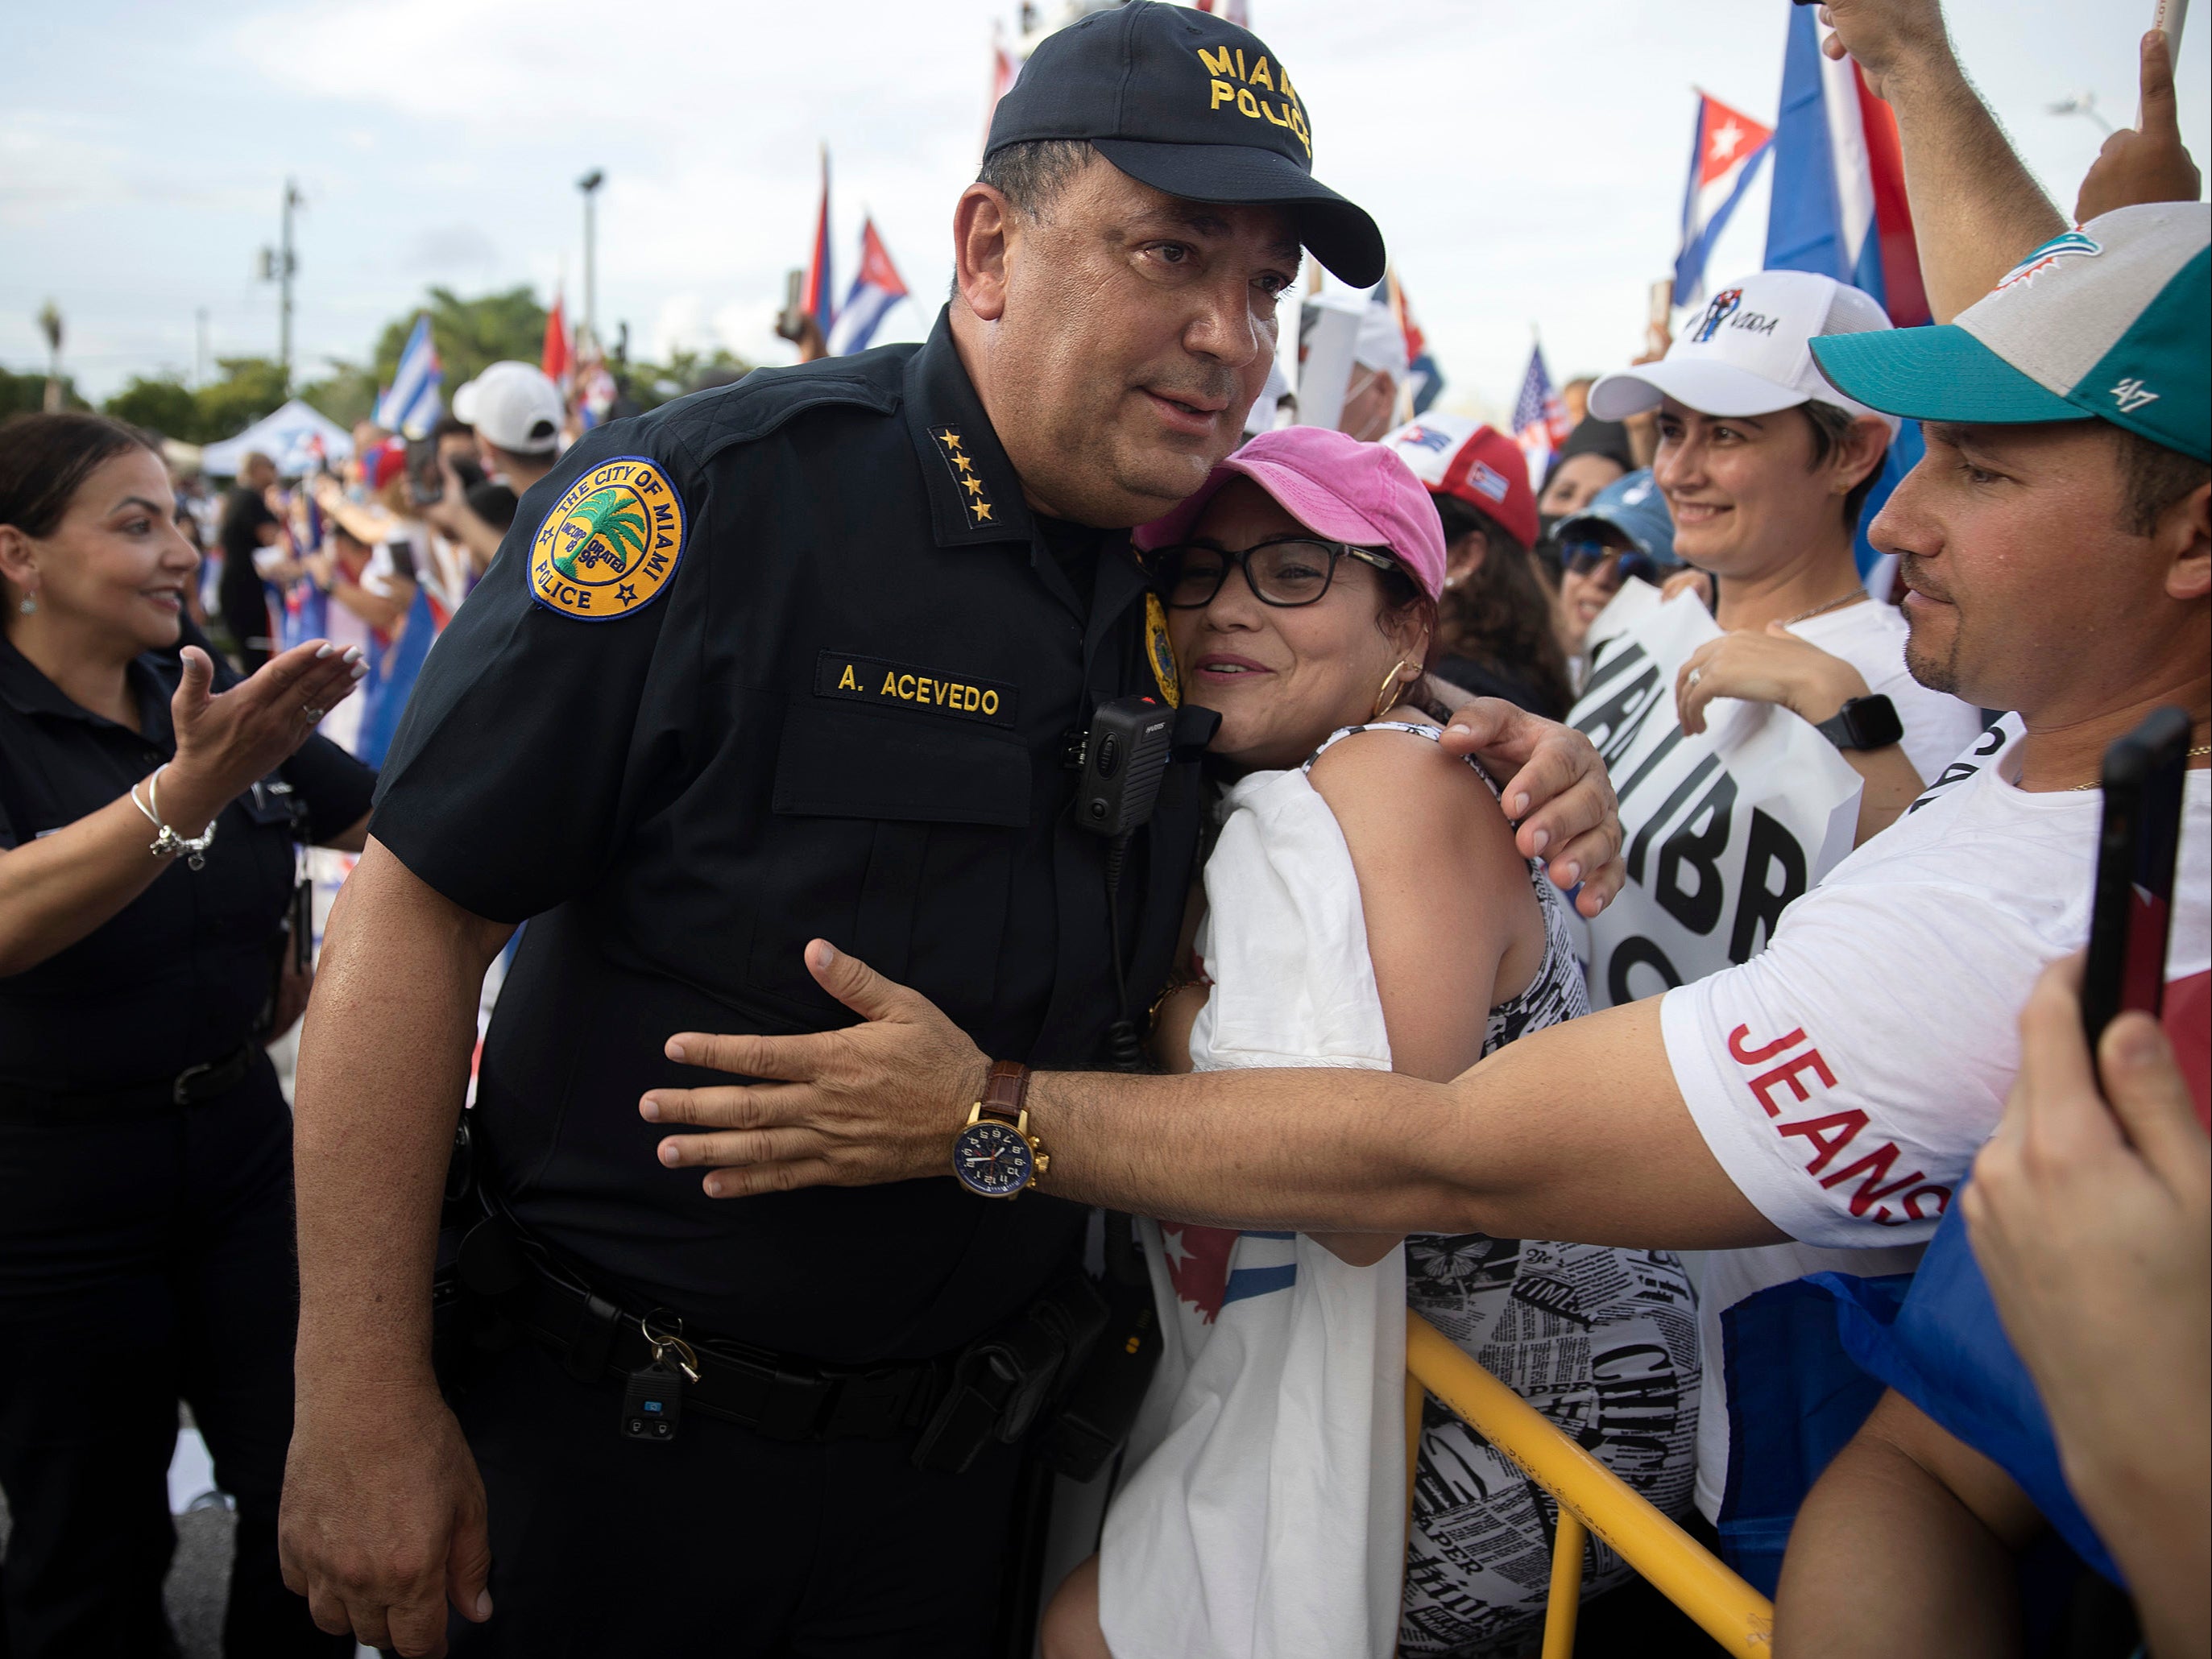 Miami Police Chief Art Acevedo hugs a protester after some had become agitated as music was being played in front of the Versailles restaurant on 14 July 2021 in Miami, Florida.